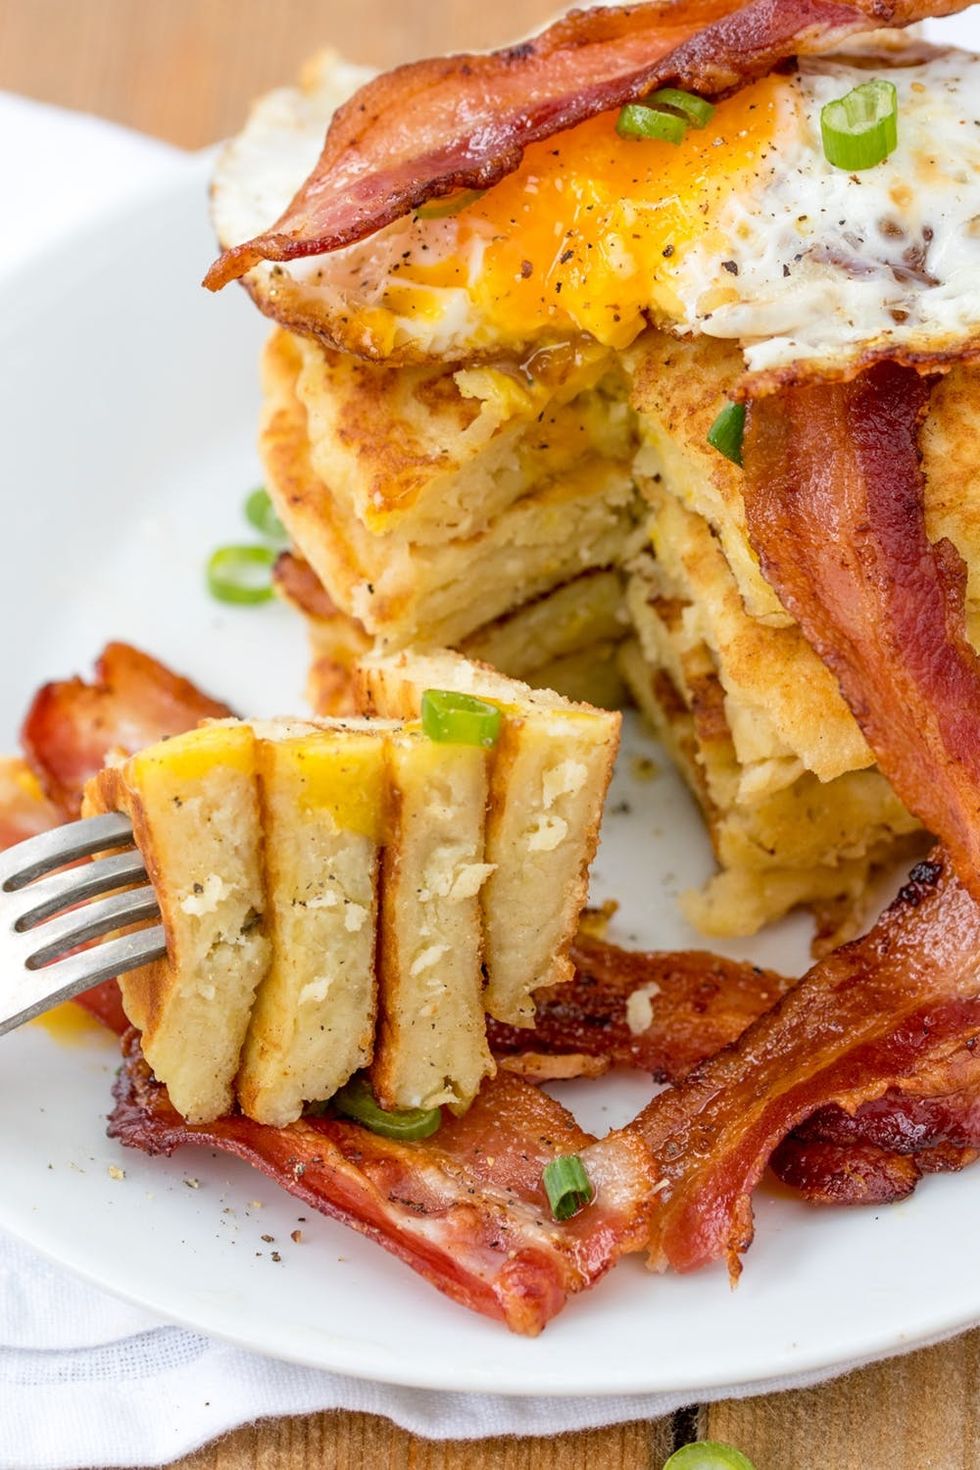 Try This Irish Boxty Breakfast For St Patty's Day